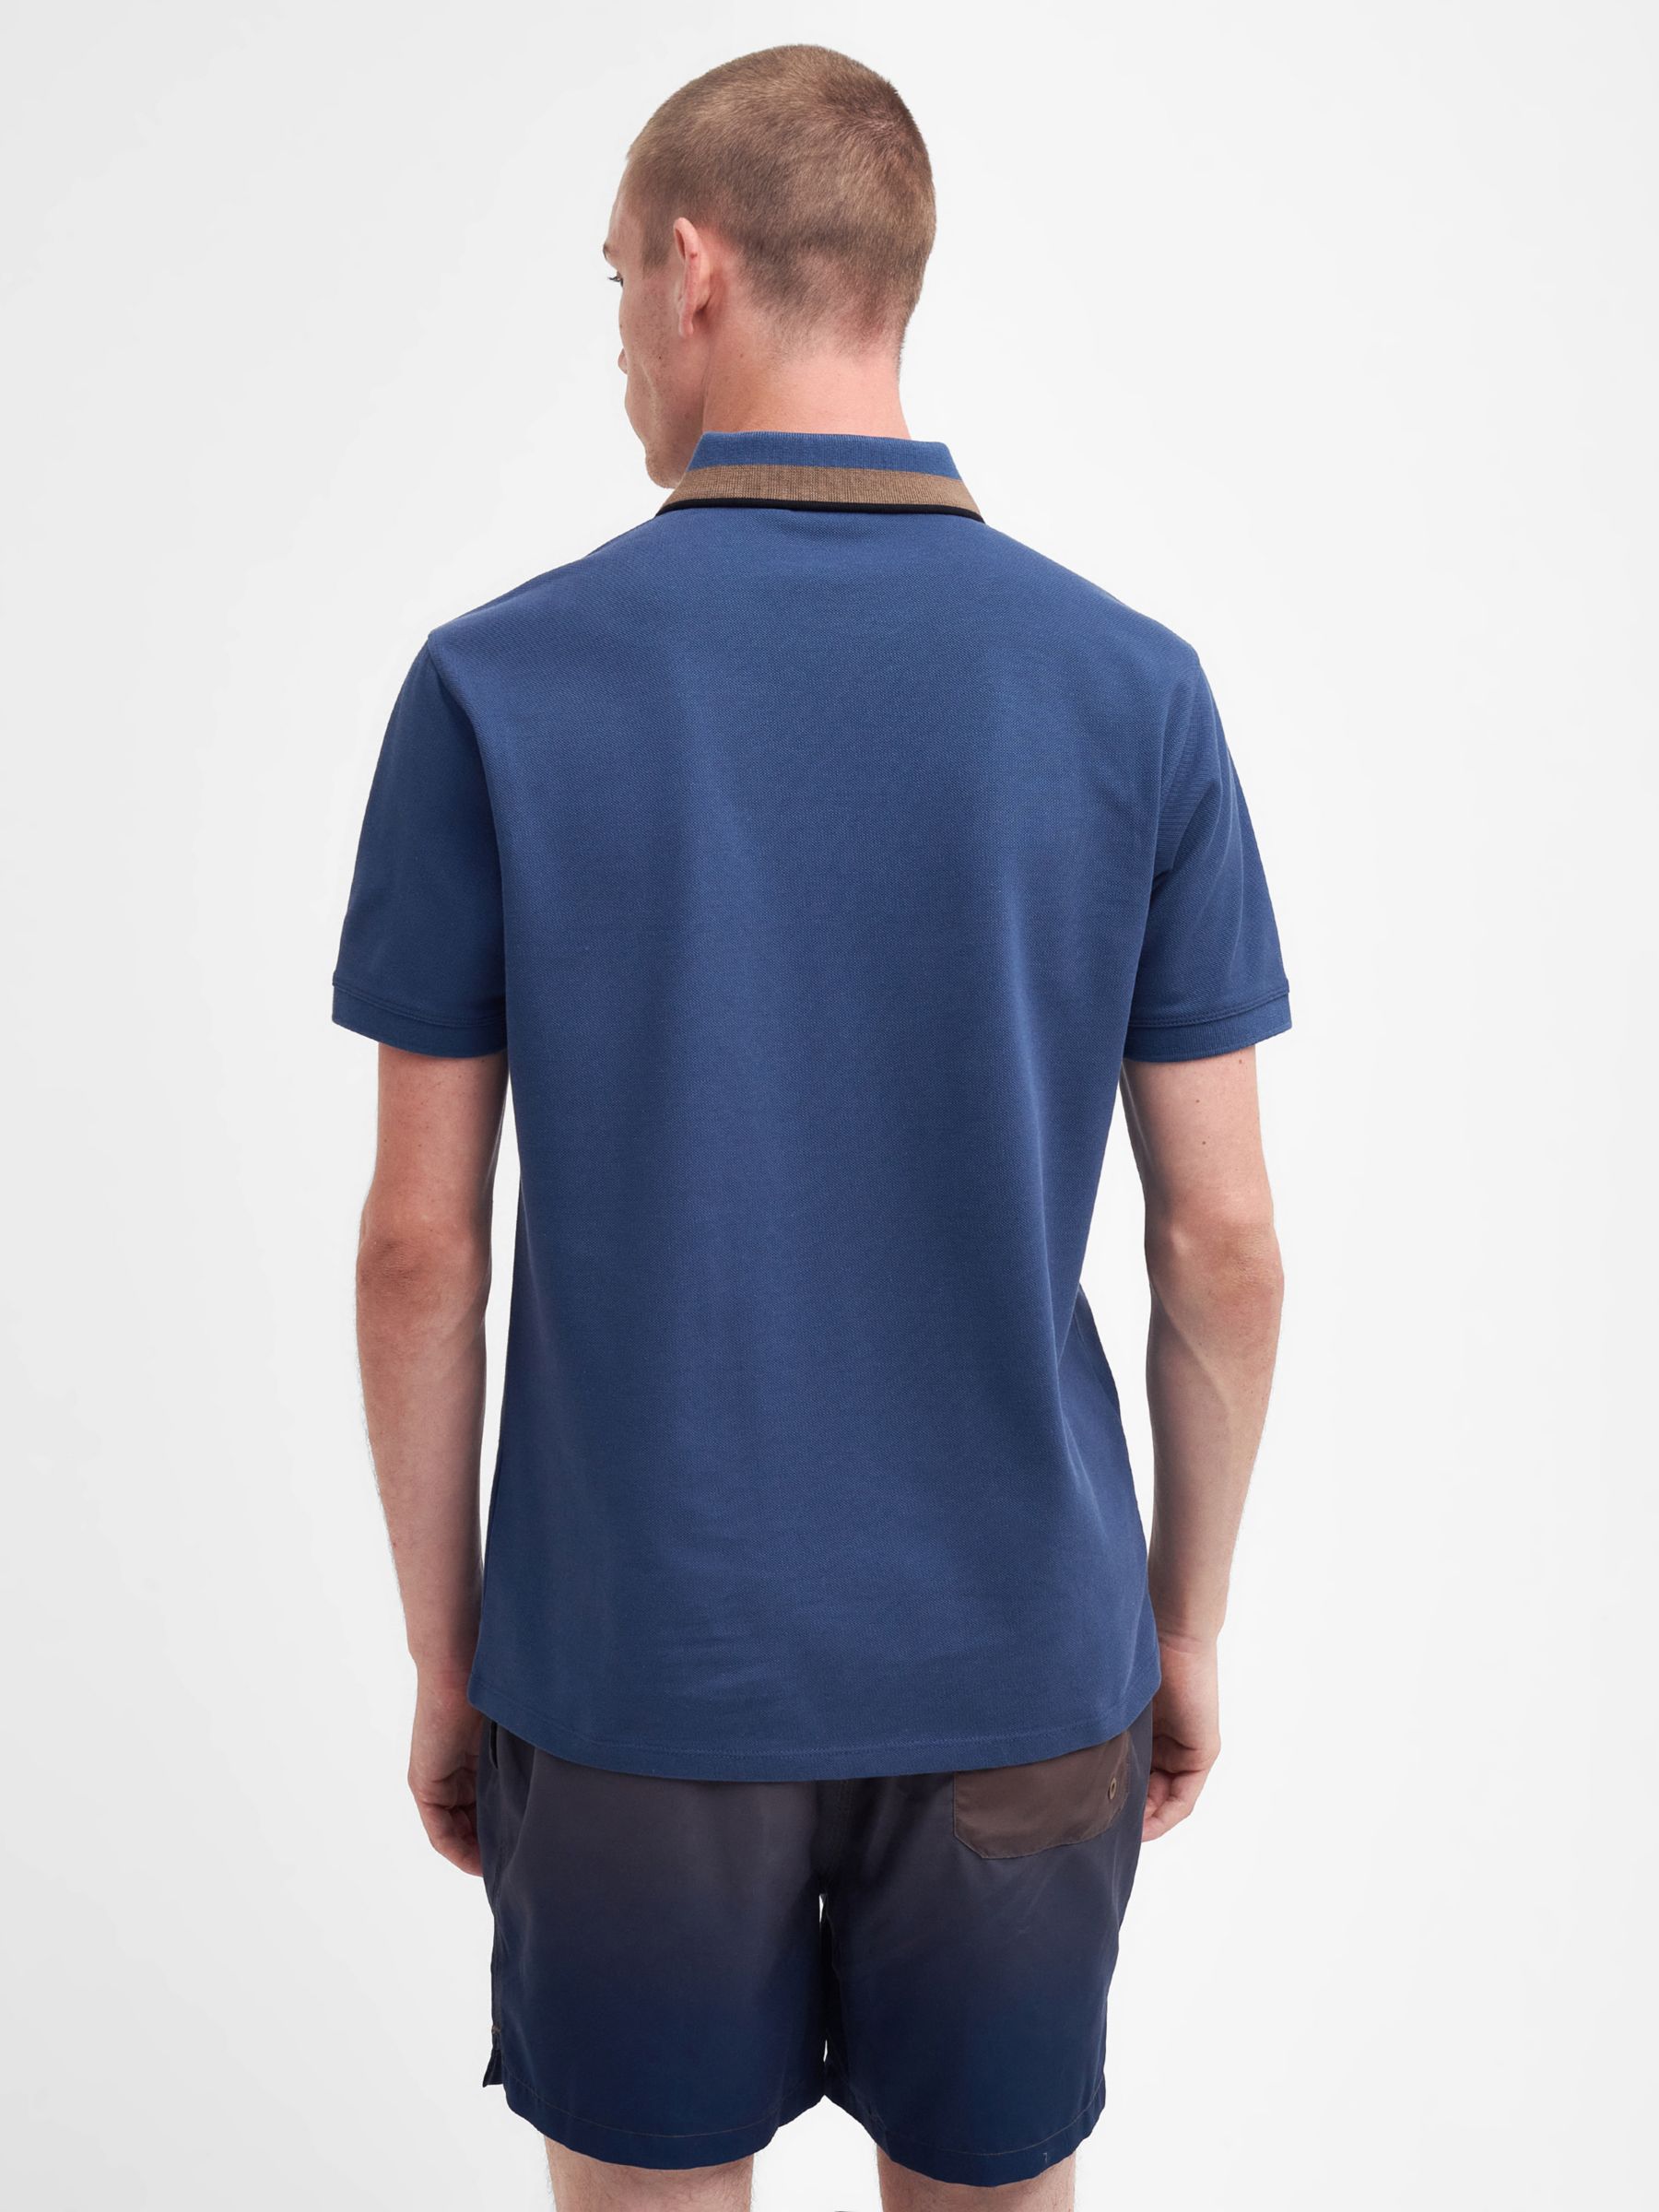 Buy Barbour International Reamp Polo Top Online at johnlewis.com